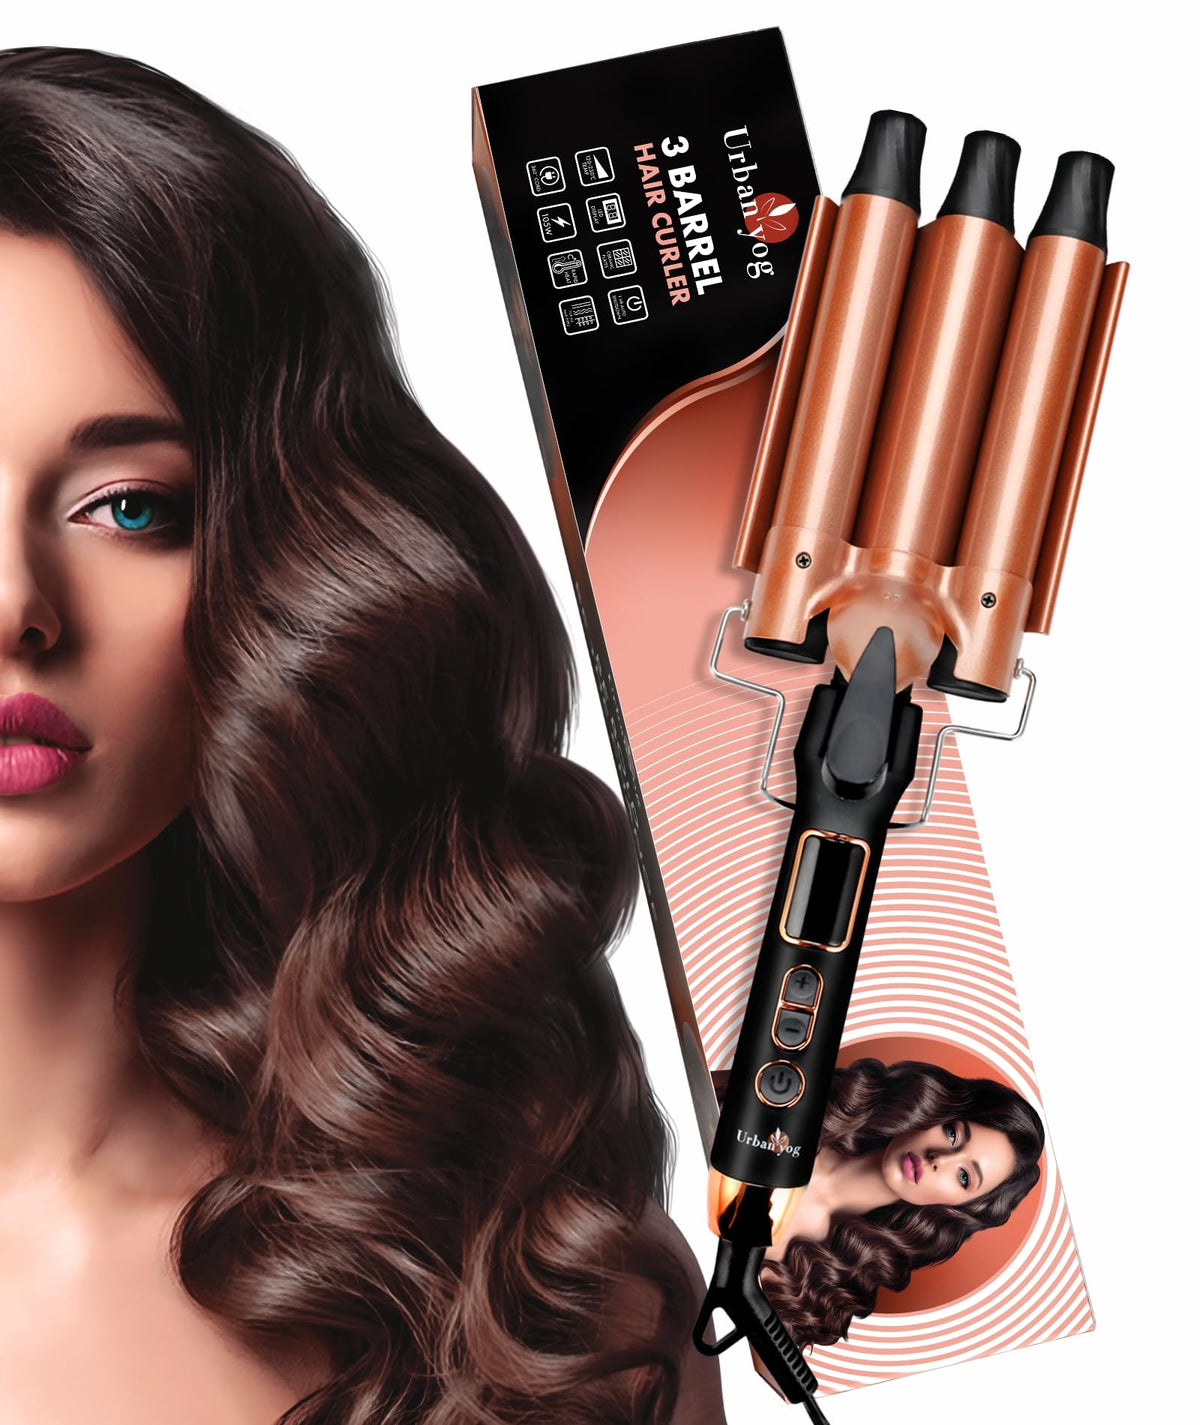 Urban yog 3 Barrel Hair Curler For Women'S Hairstyle|Double Ceramic Coated Barrels|Instant Heat Up|Adjustable Temperature Settings With Led Display|Suitable For All Hair Types|Black And Rose Gold